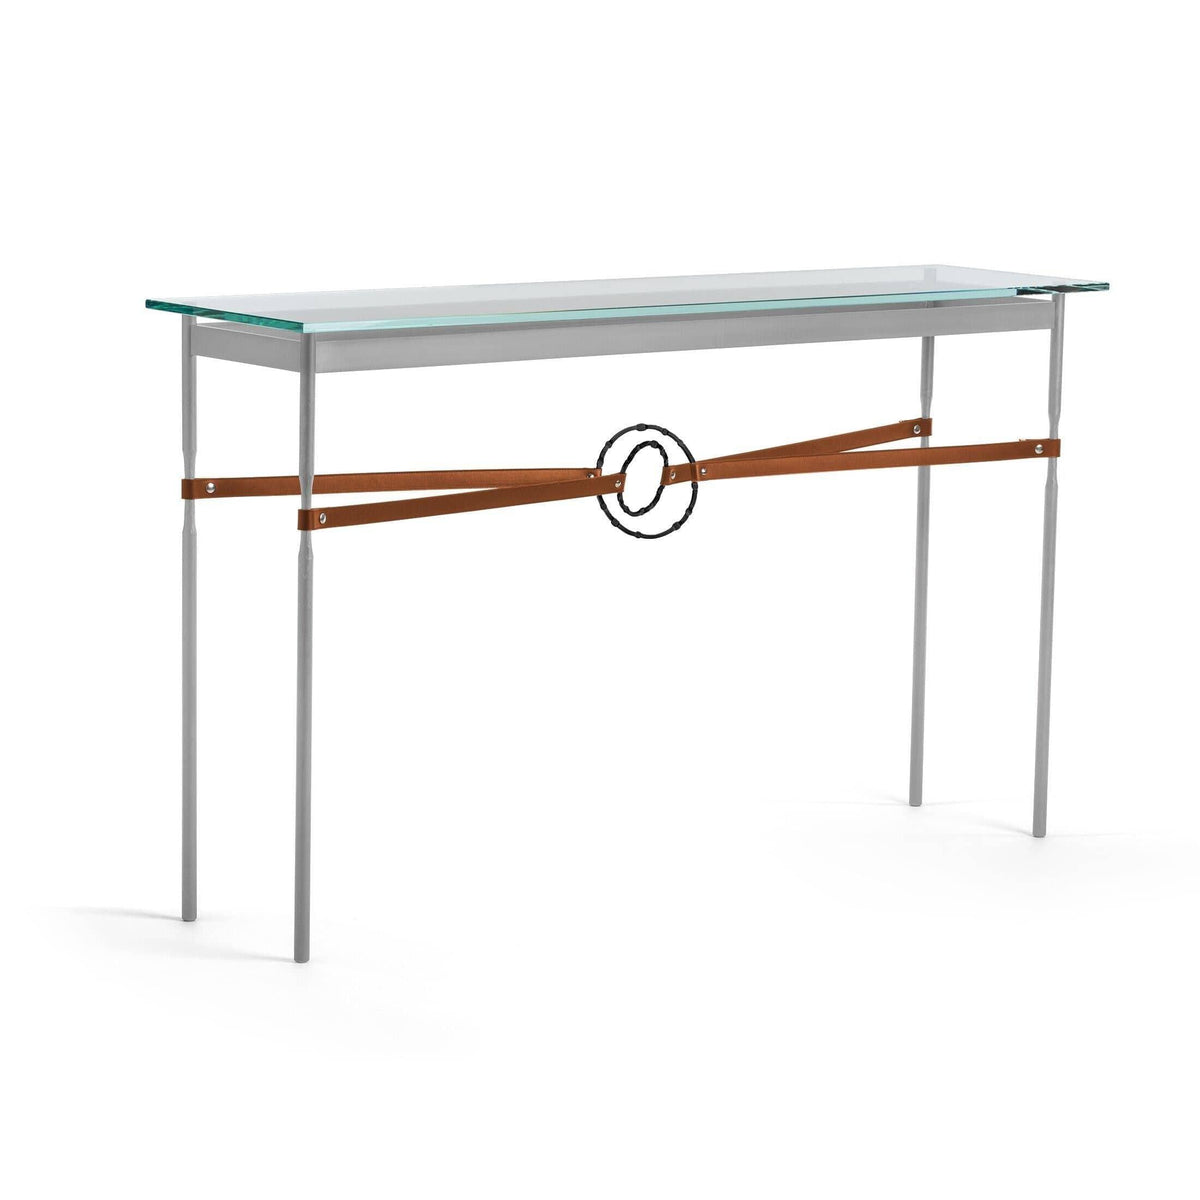 Hubbardton Forge - Equus Chestnut Leather Console Table - 750118-82-10-LC-VA0714 | Montreal Lighting & Hardware